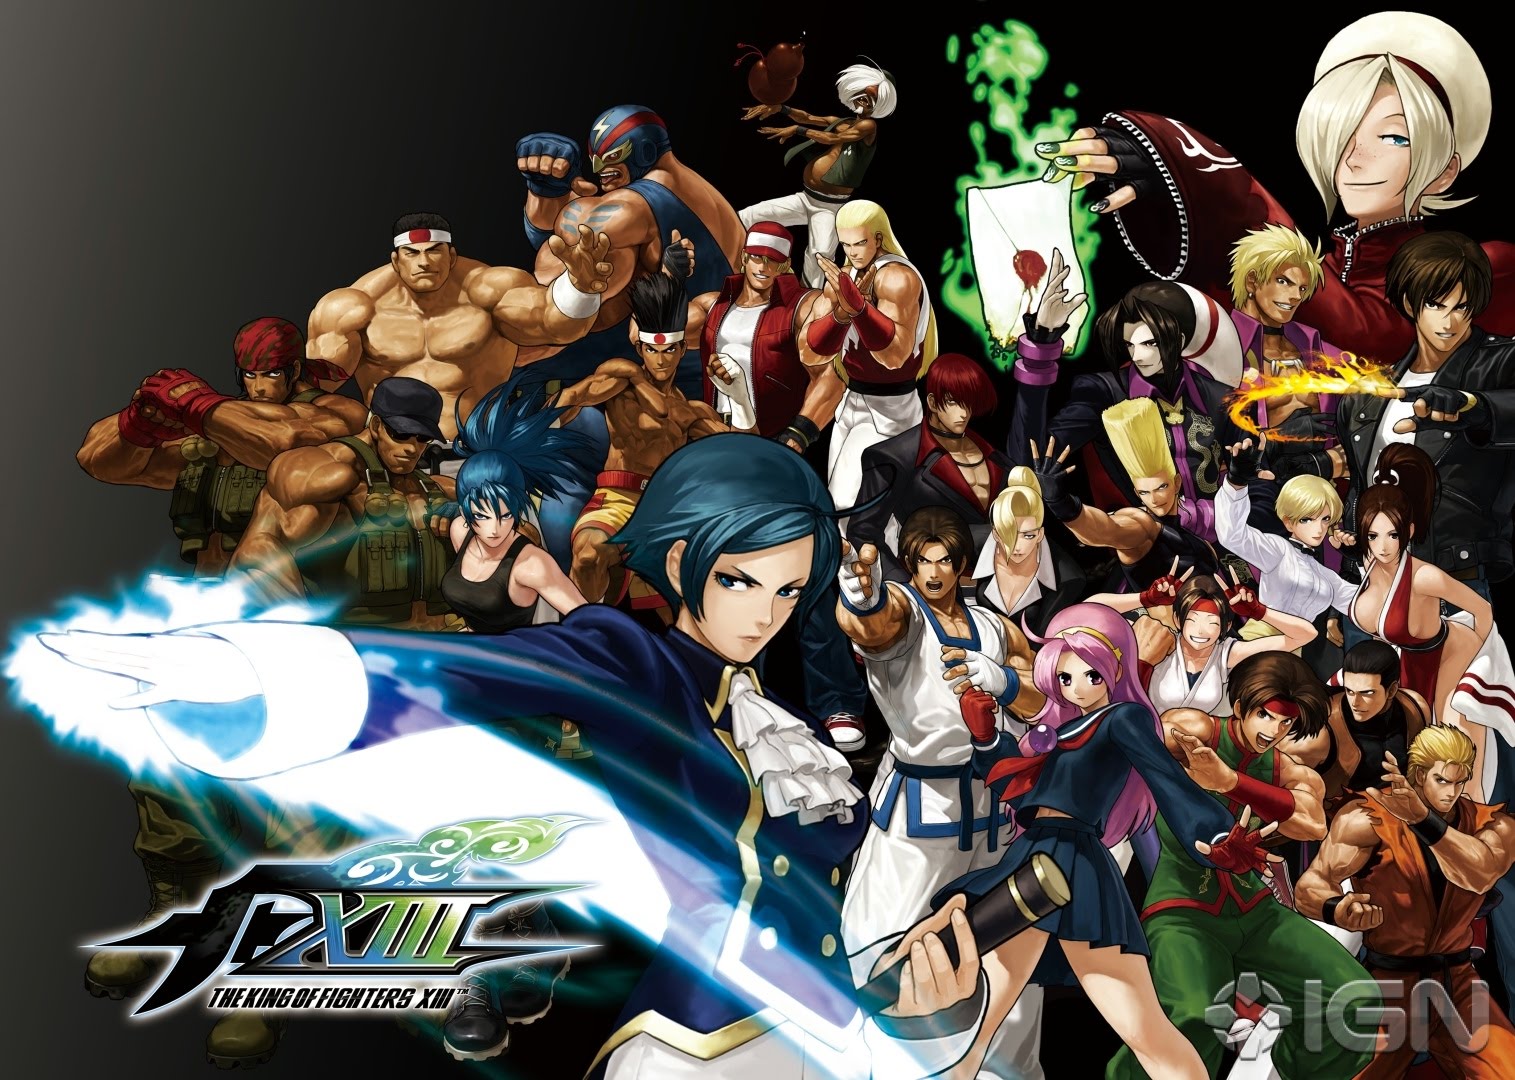 Kings Of Fighters Backgrounds, Compatible - PC, Mobile, Gadgets| 1515x1080 px